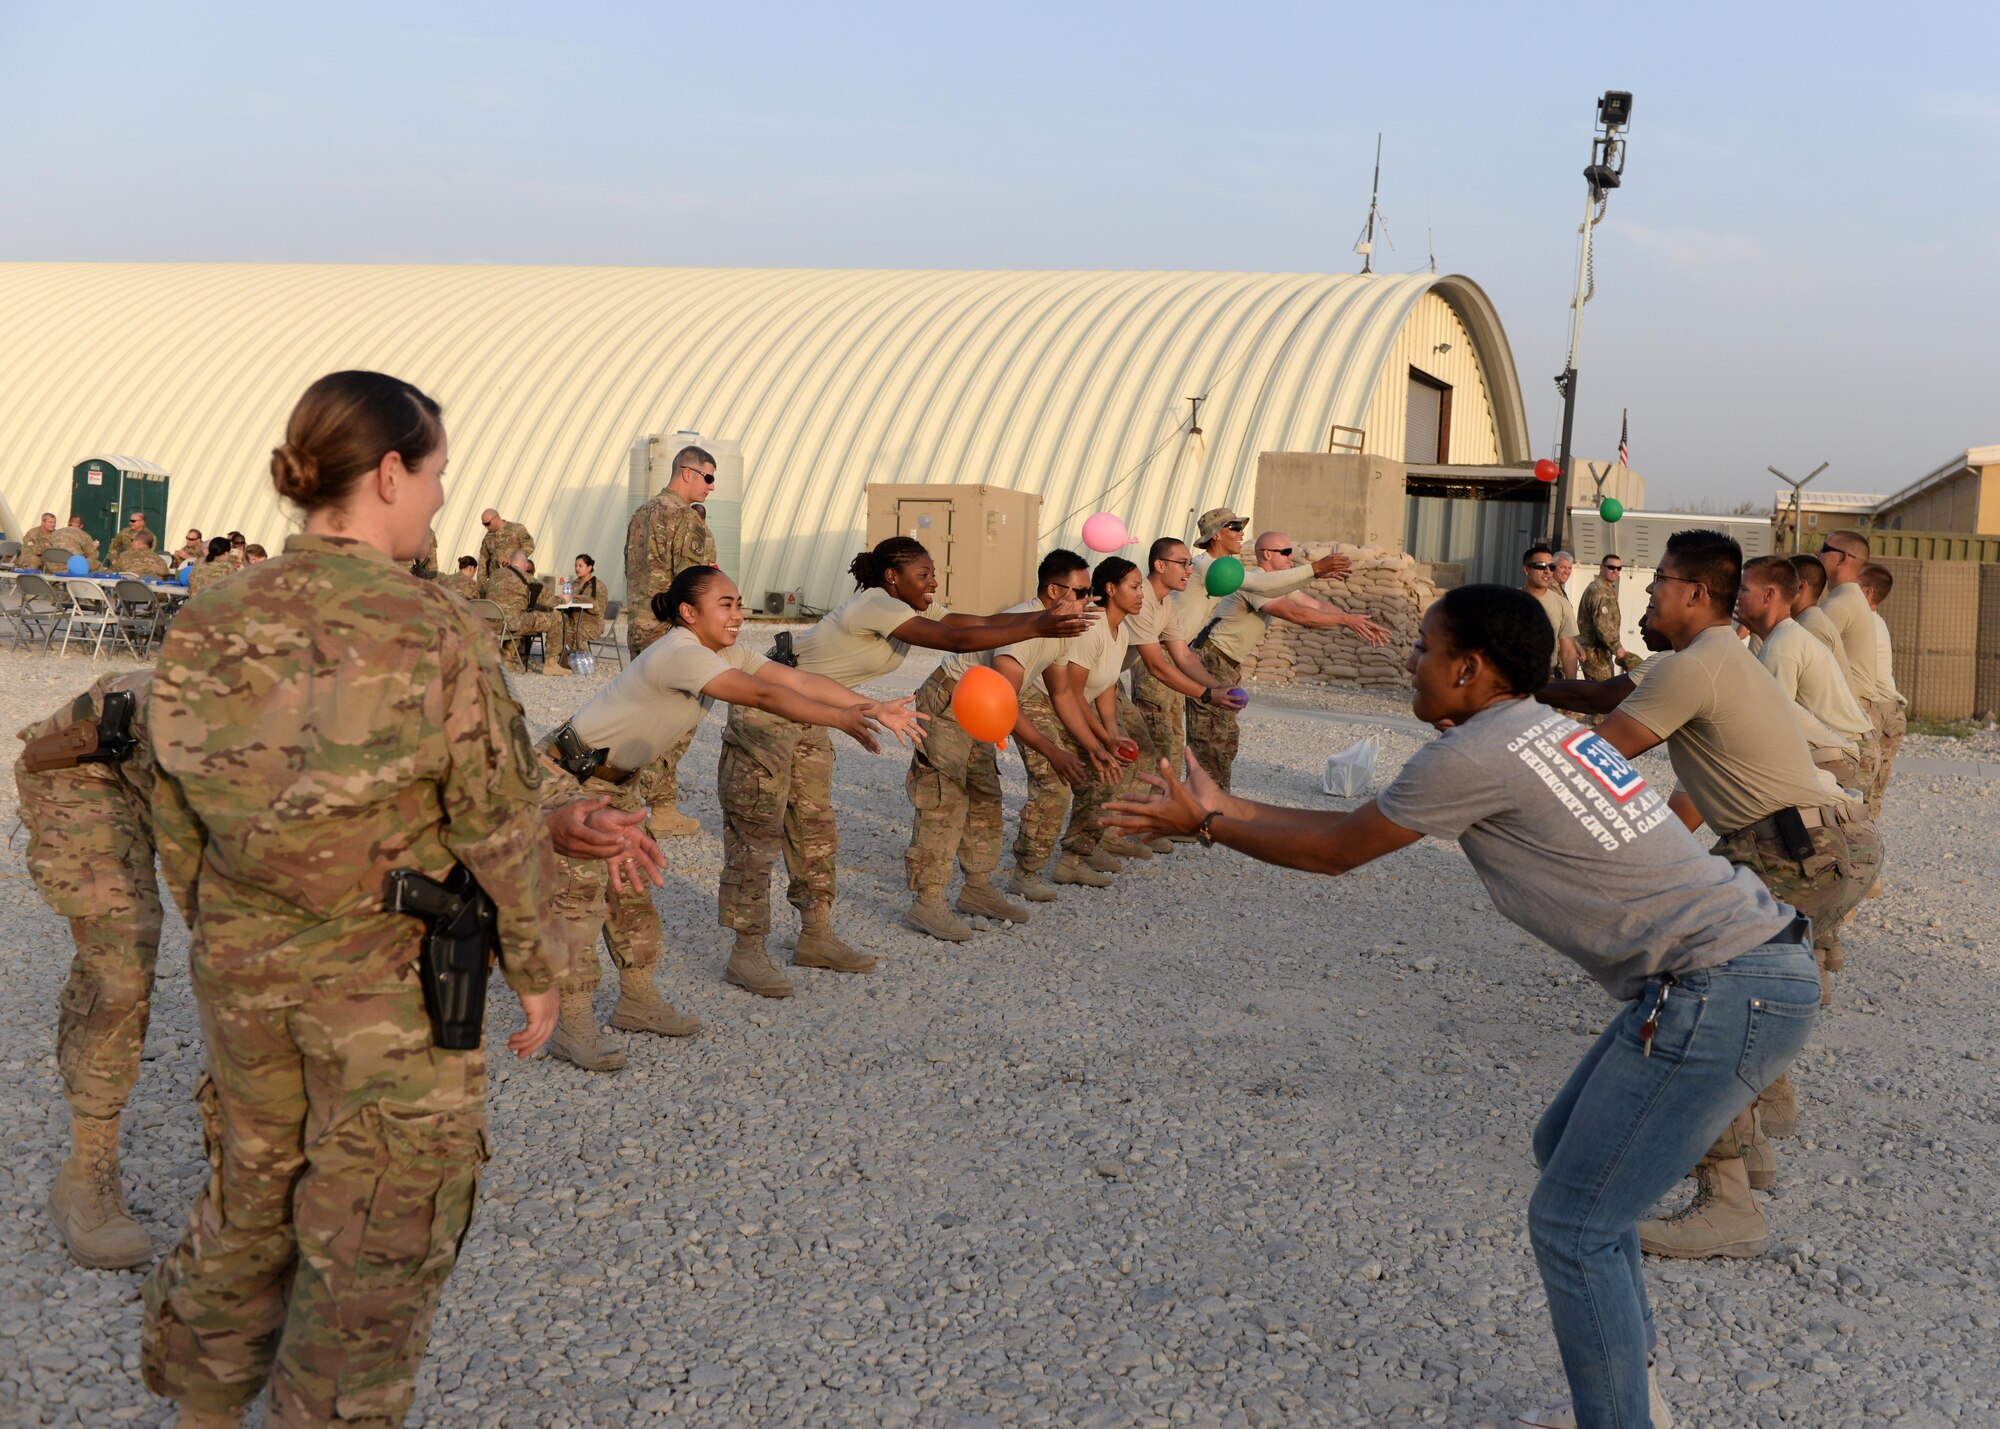 U.S. Airmen assigned to the 455th Air Expeditionary Wing participate in games during an Air Force birthday celebration Sept. 18, 2015, at Bagram Airfield, Afghanistan. The block party which was hosted by the Armed Forces Committed to Excellence council, the 455th Force Support Squadron and other private organizations featured games, food and a traditional AF cake cutting ceremony. (U.S. Air Force photo by Senior Airman Cierra Presentado/Released)